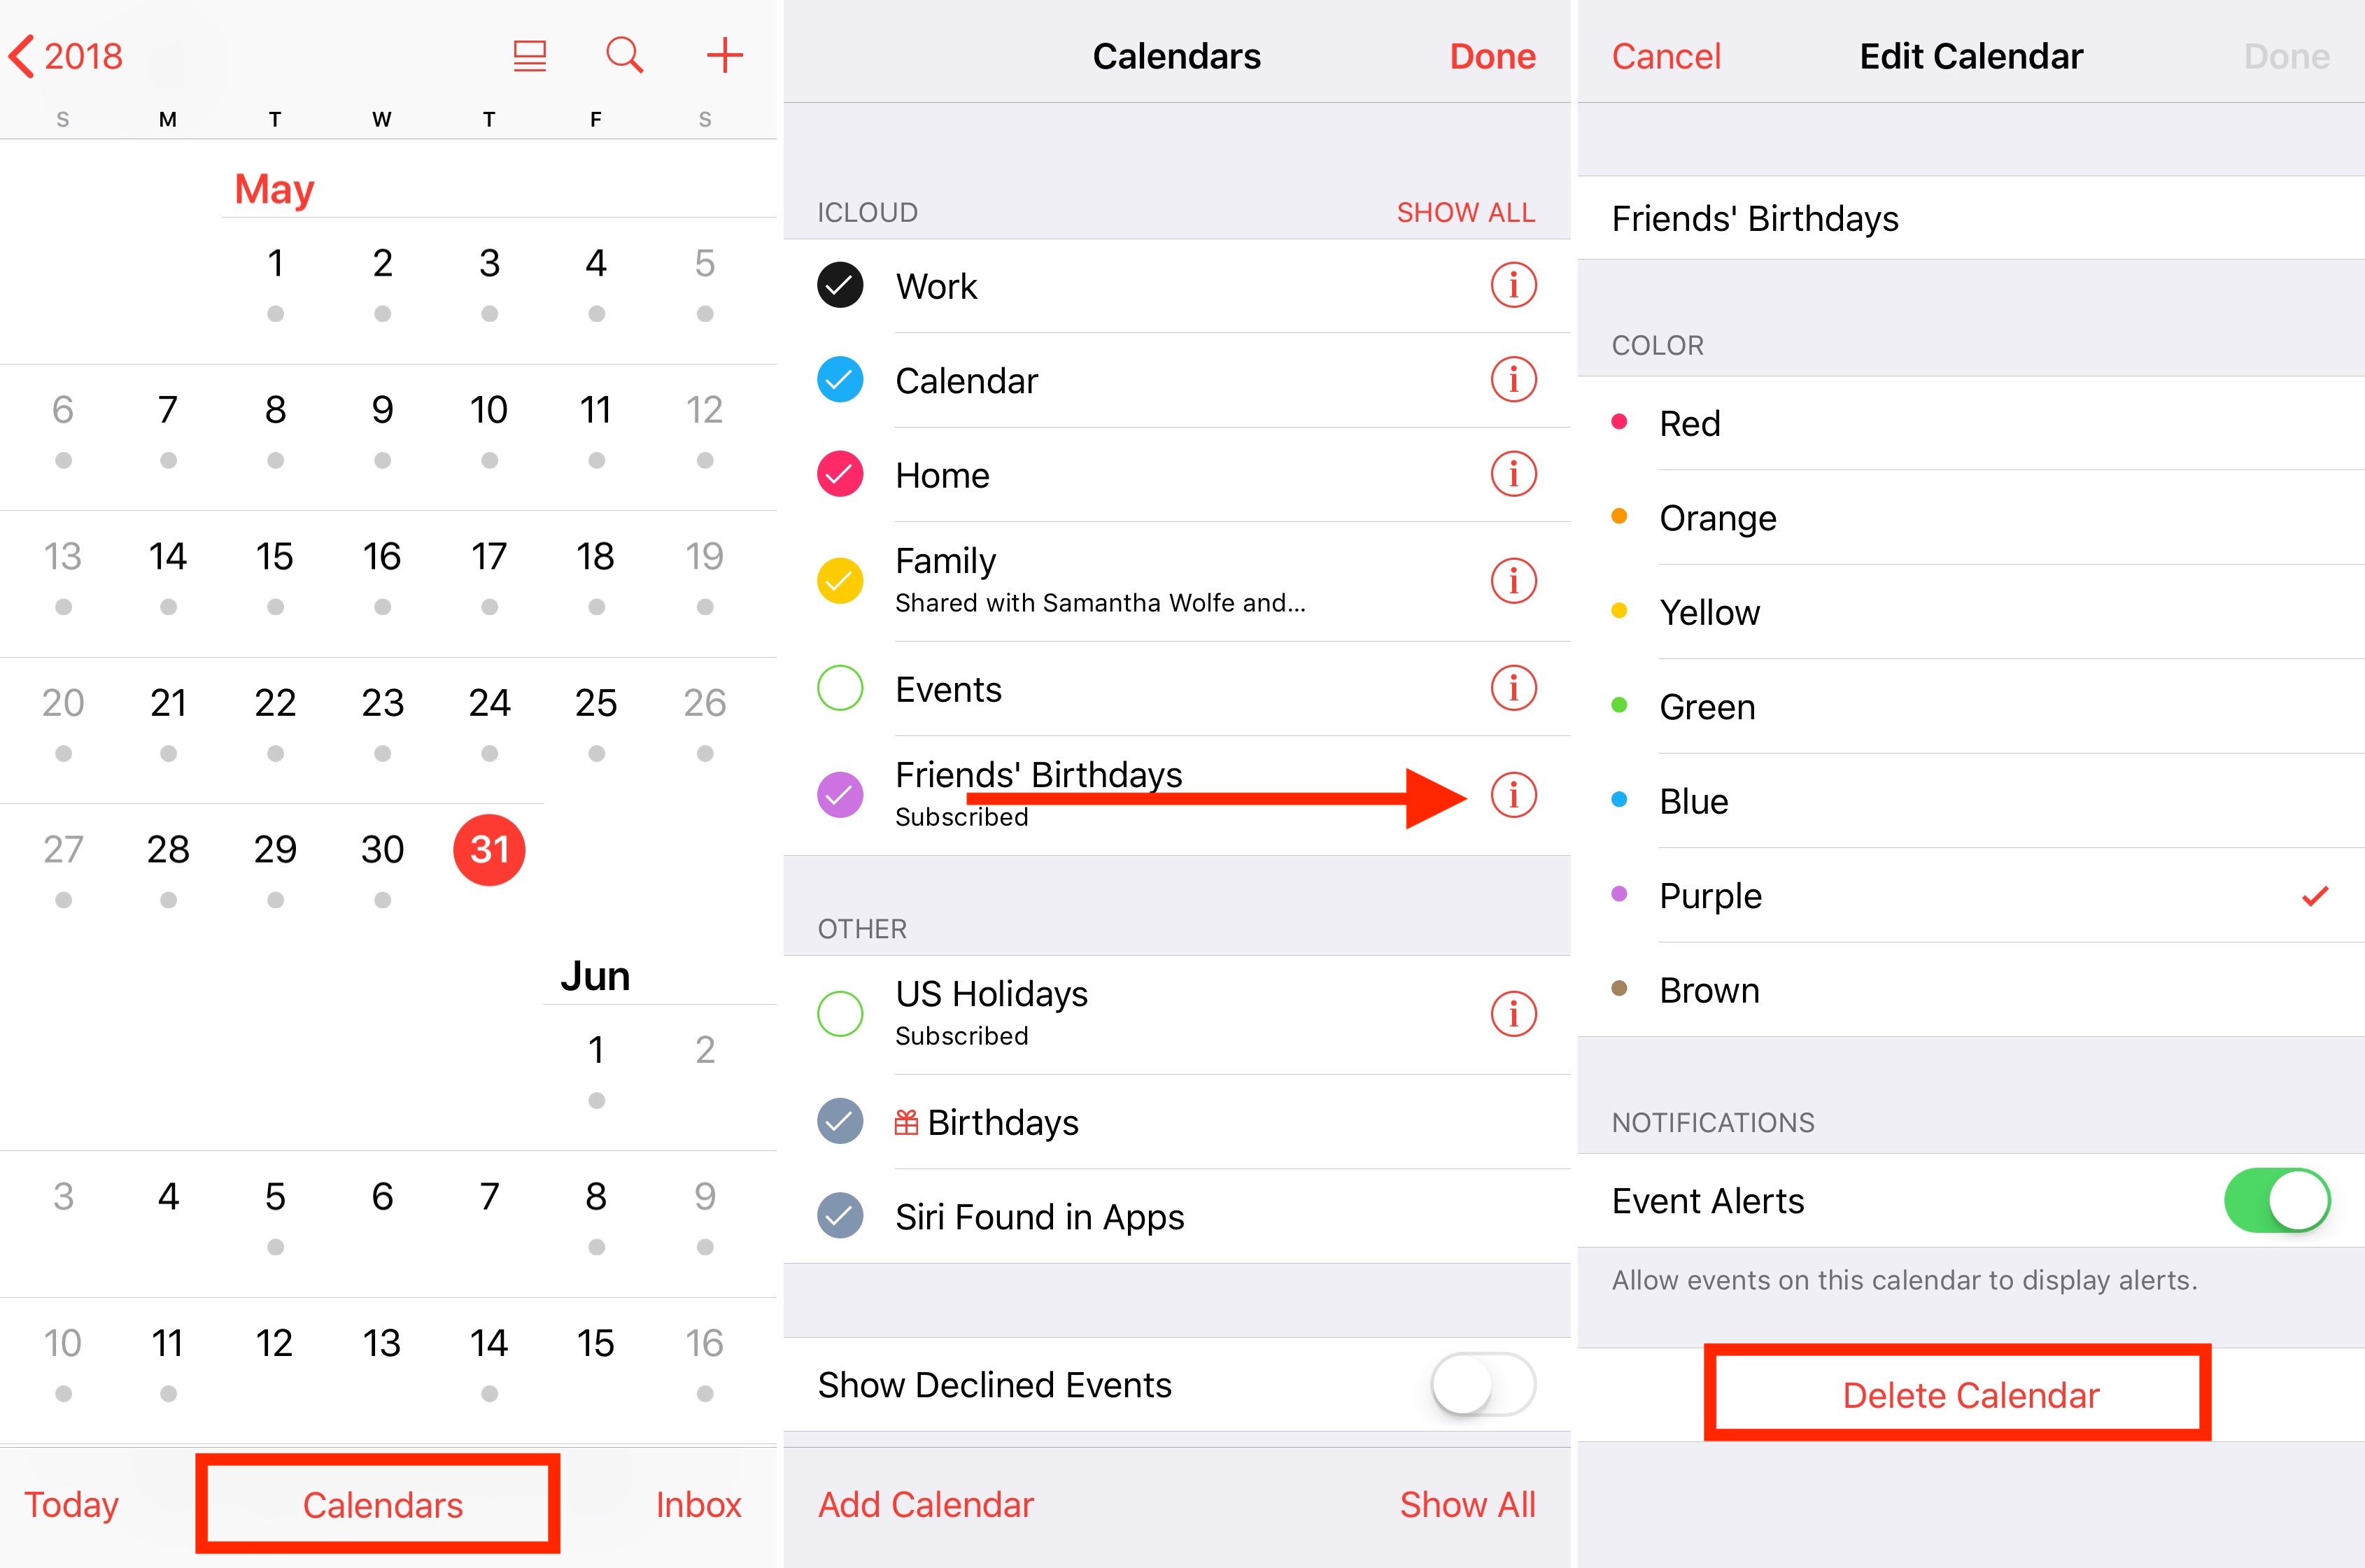 how to delete an event in calendar